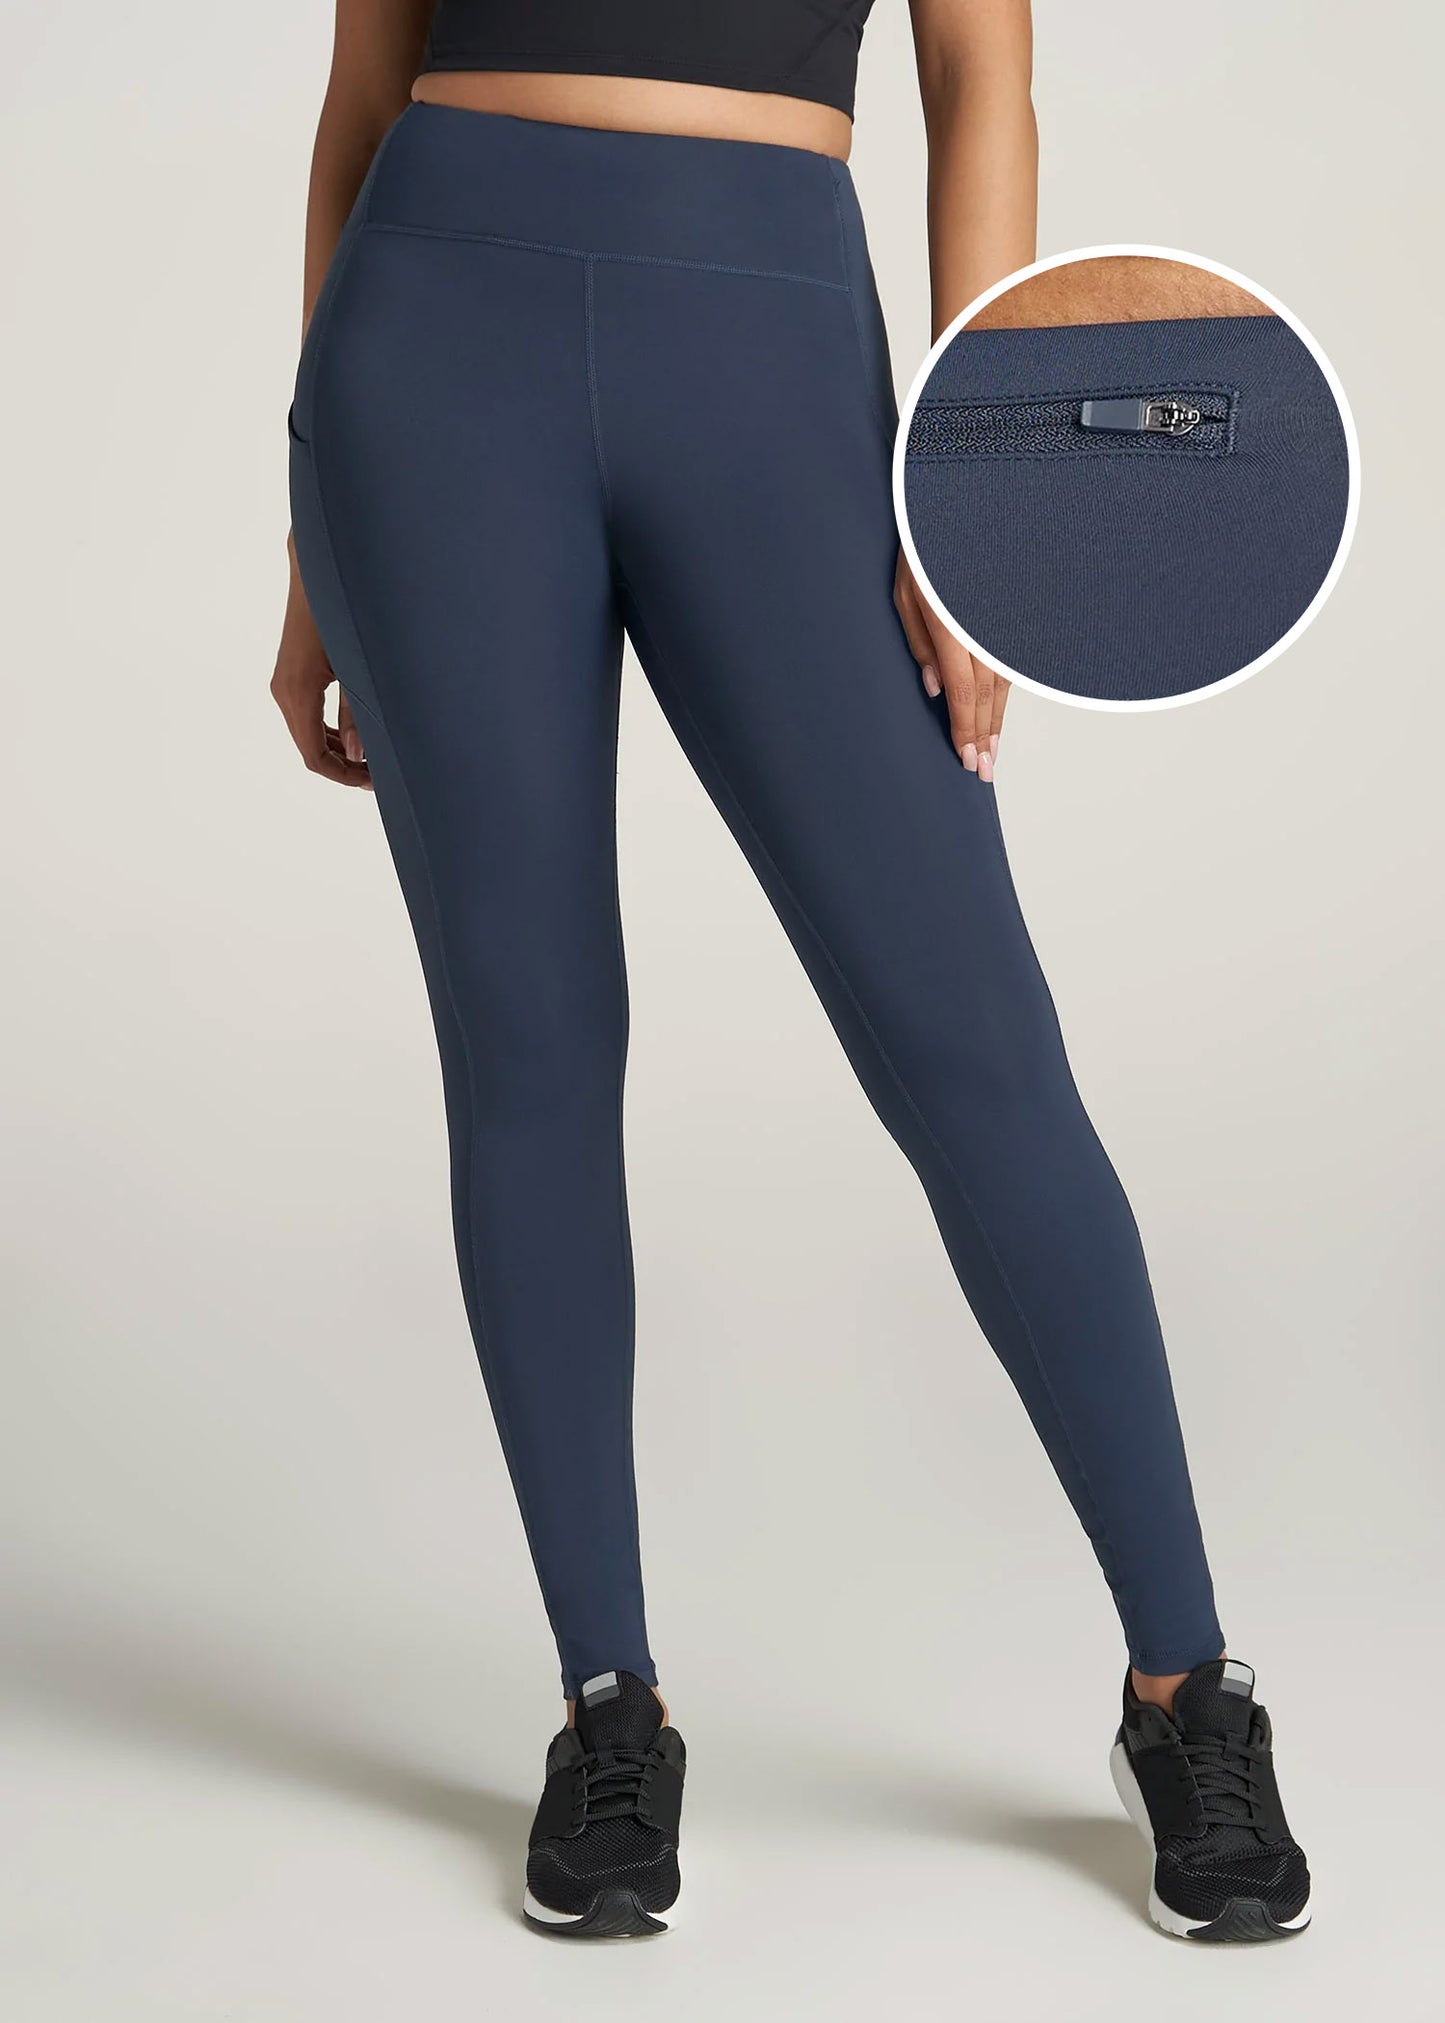 Women's Active Tall Leggings with Pockets in Olive